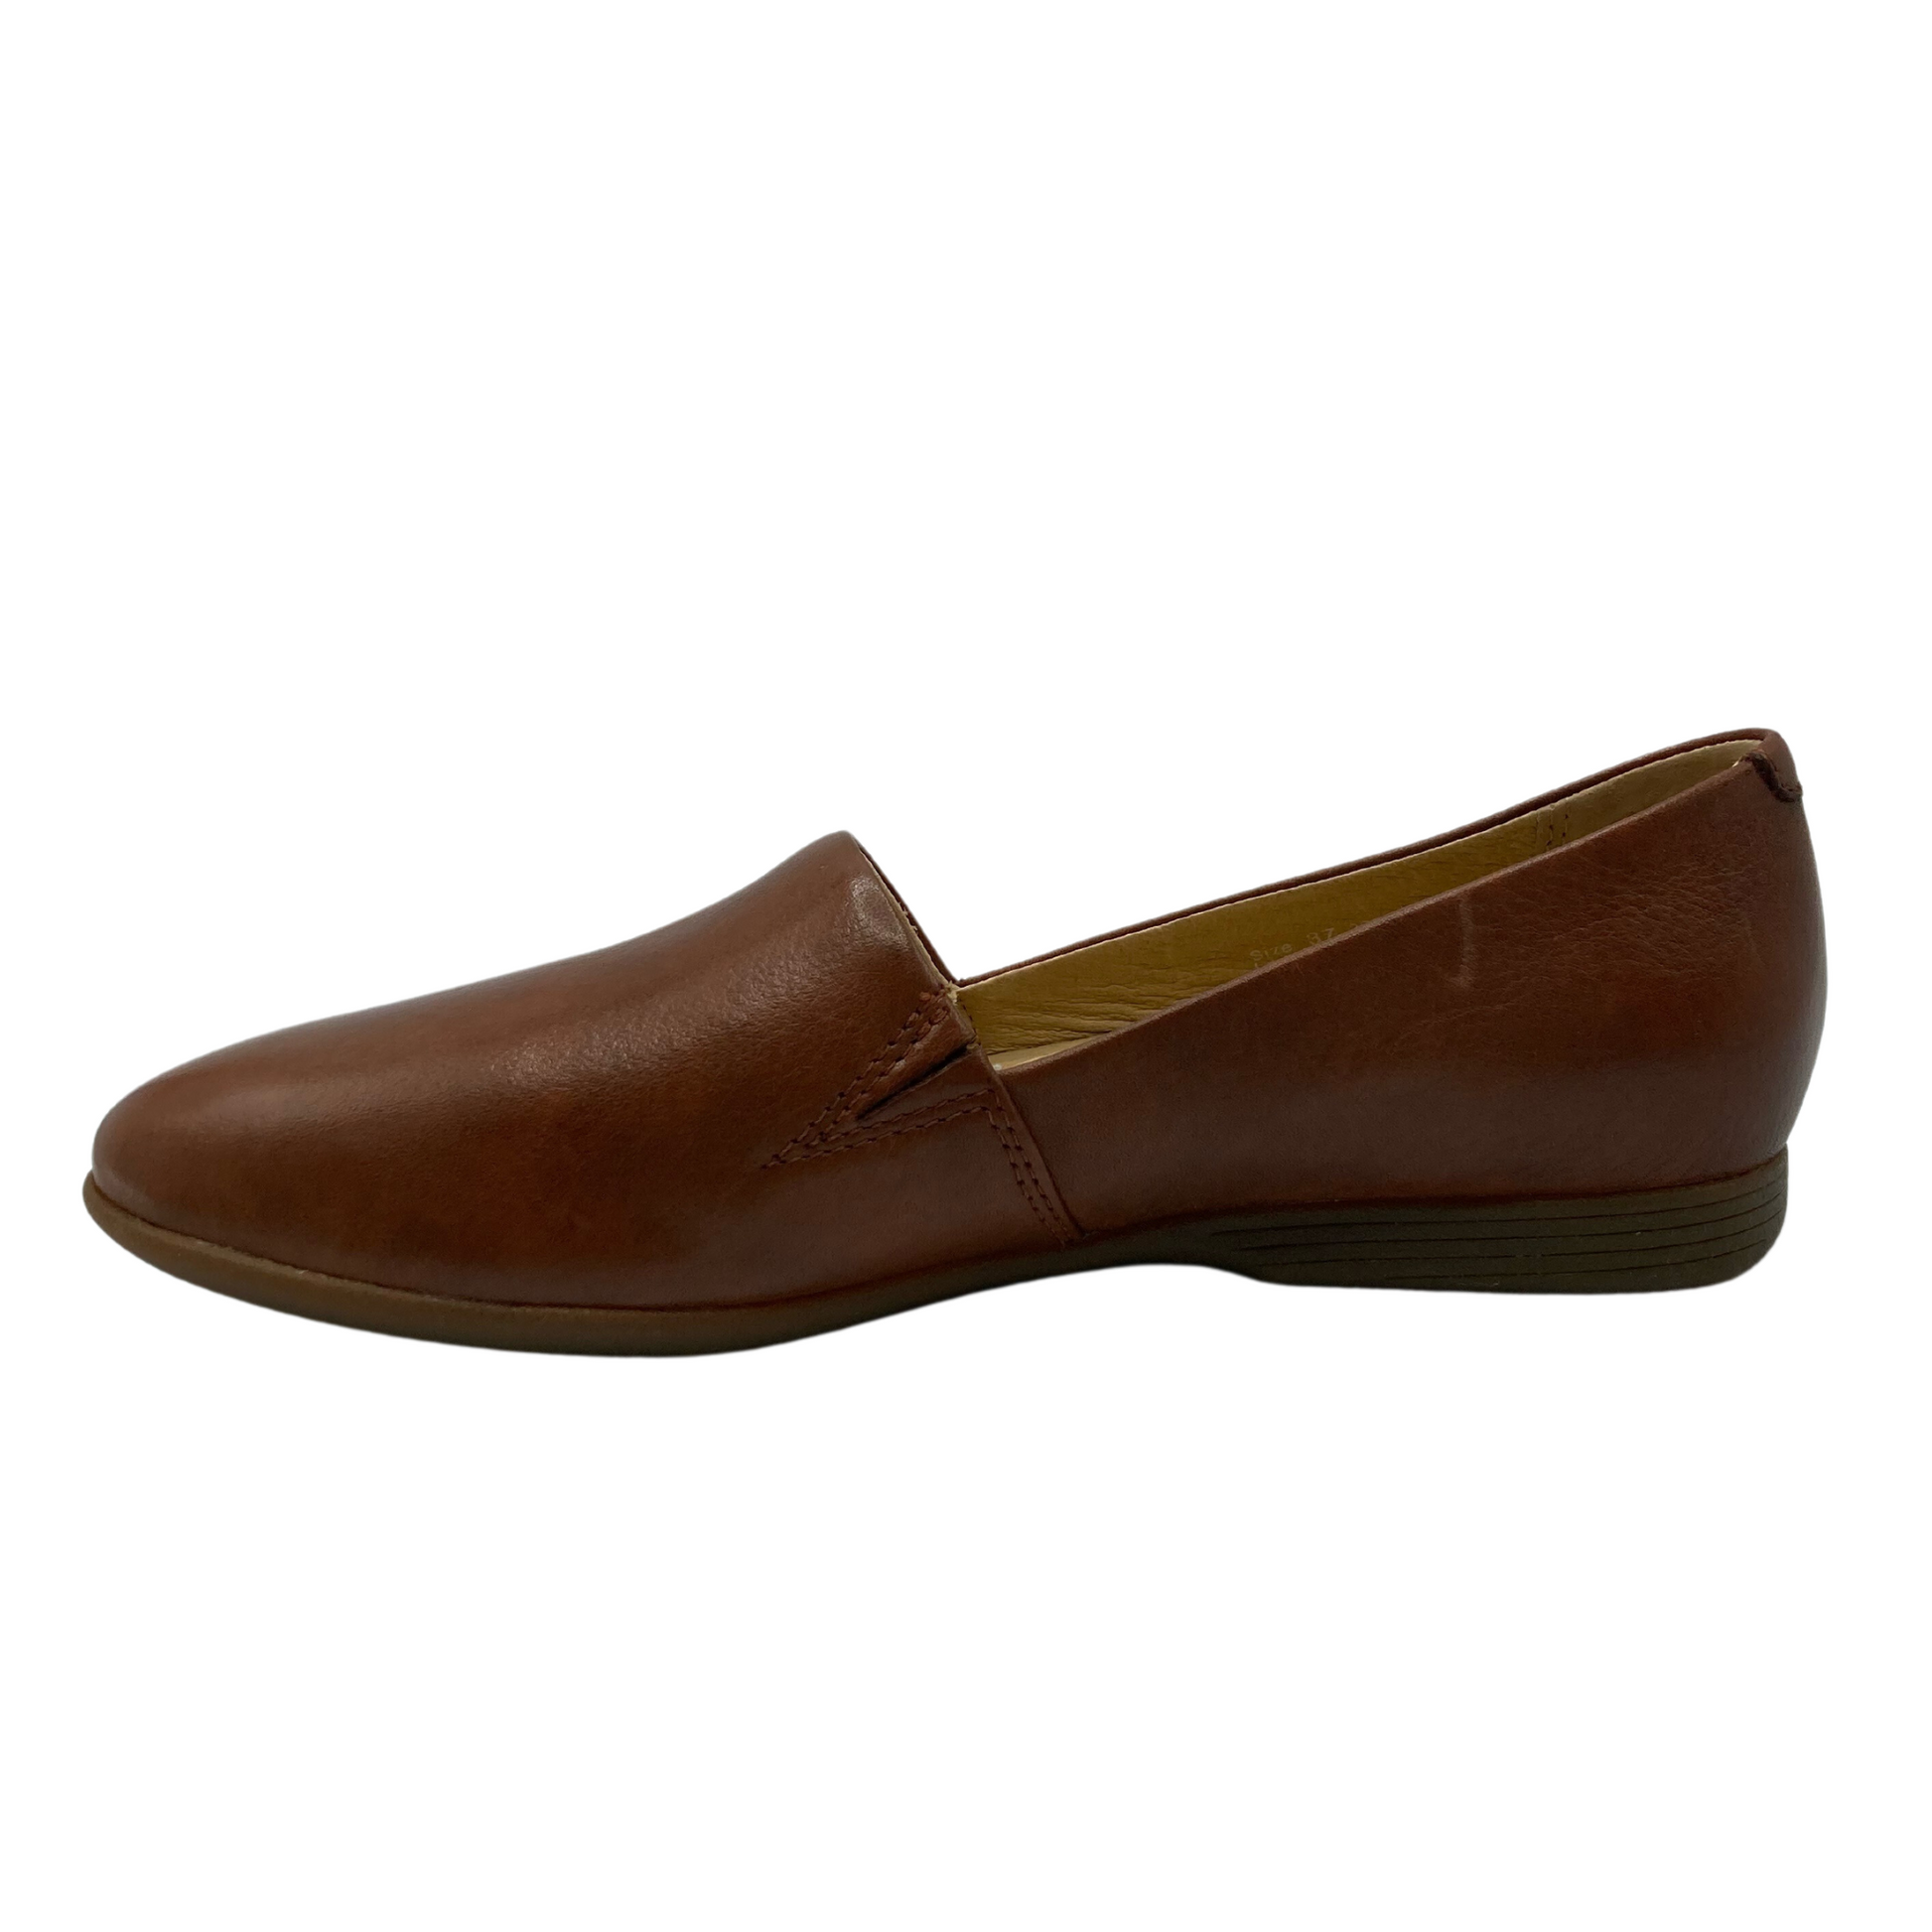 Left facing view of moc style loafer with rounded toe